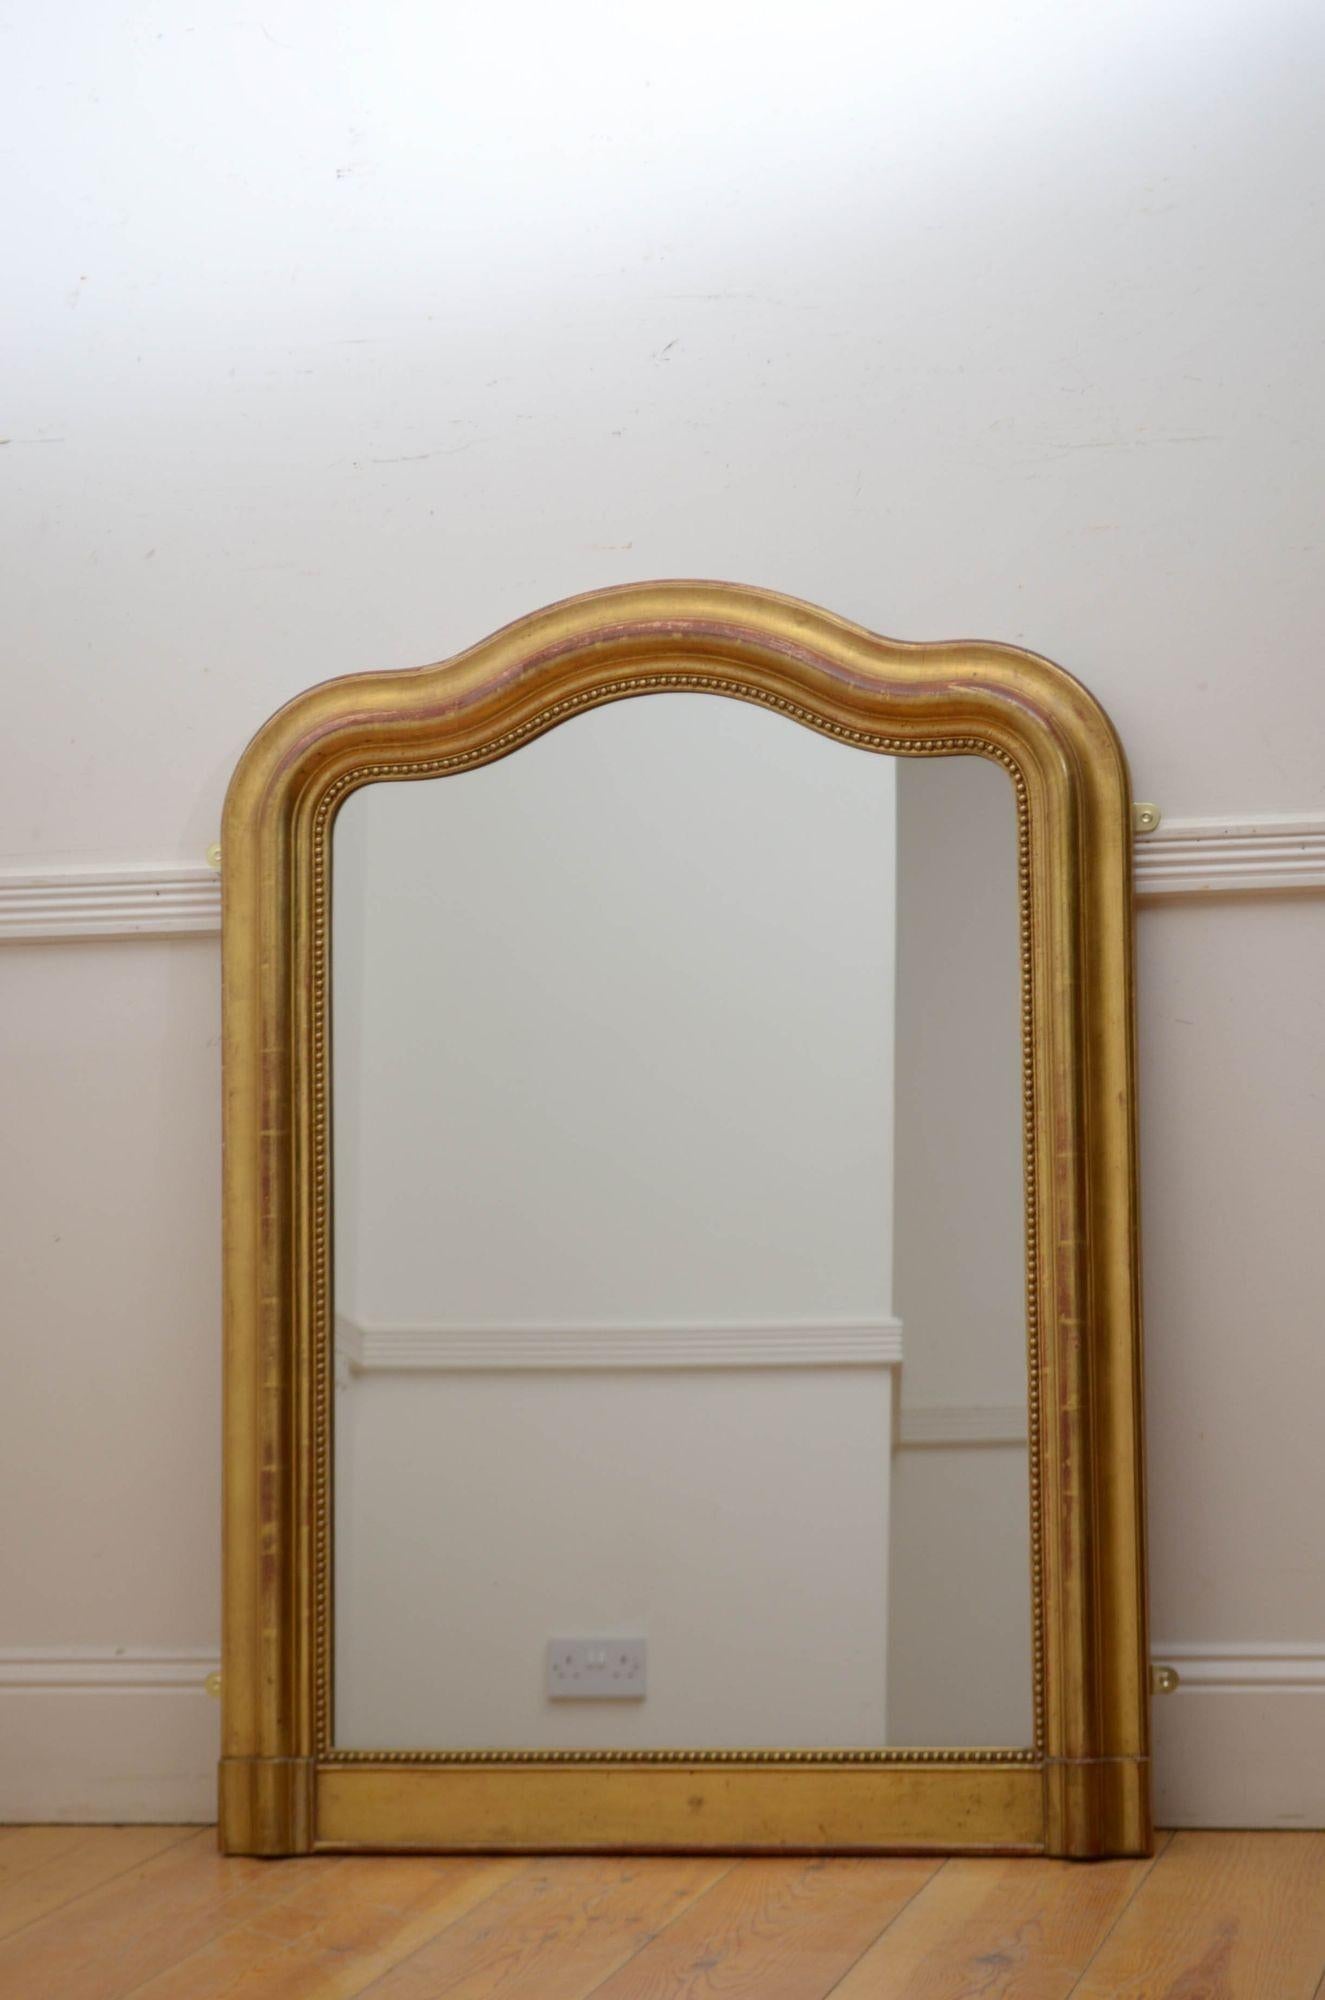 Sn5541 A XIXth century French gilded pier mirror, having original glass with some foxing and sparkle in beaded, moulded and gilded frame with serpentine top. This antique mirror retains its original glass, original gilt and original backboards, all